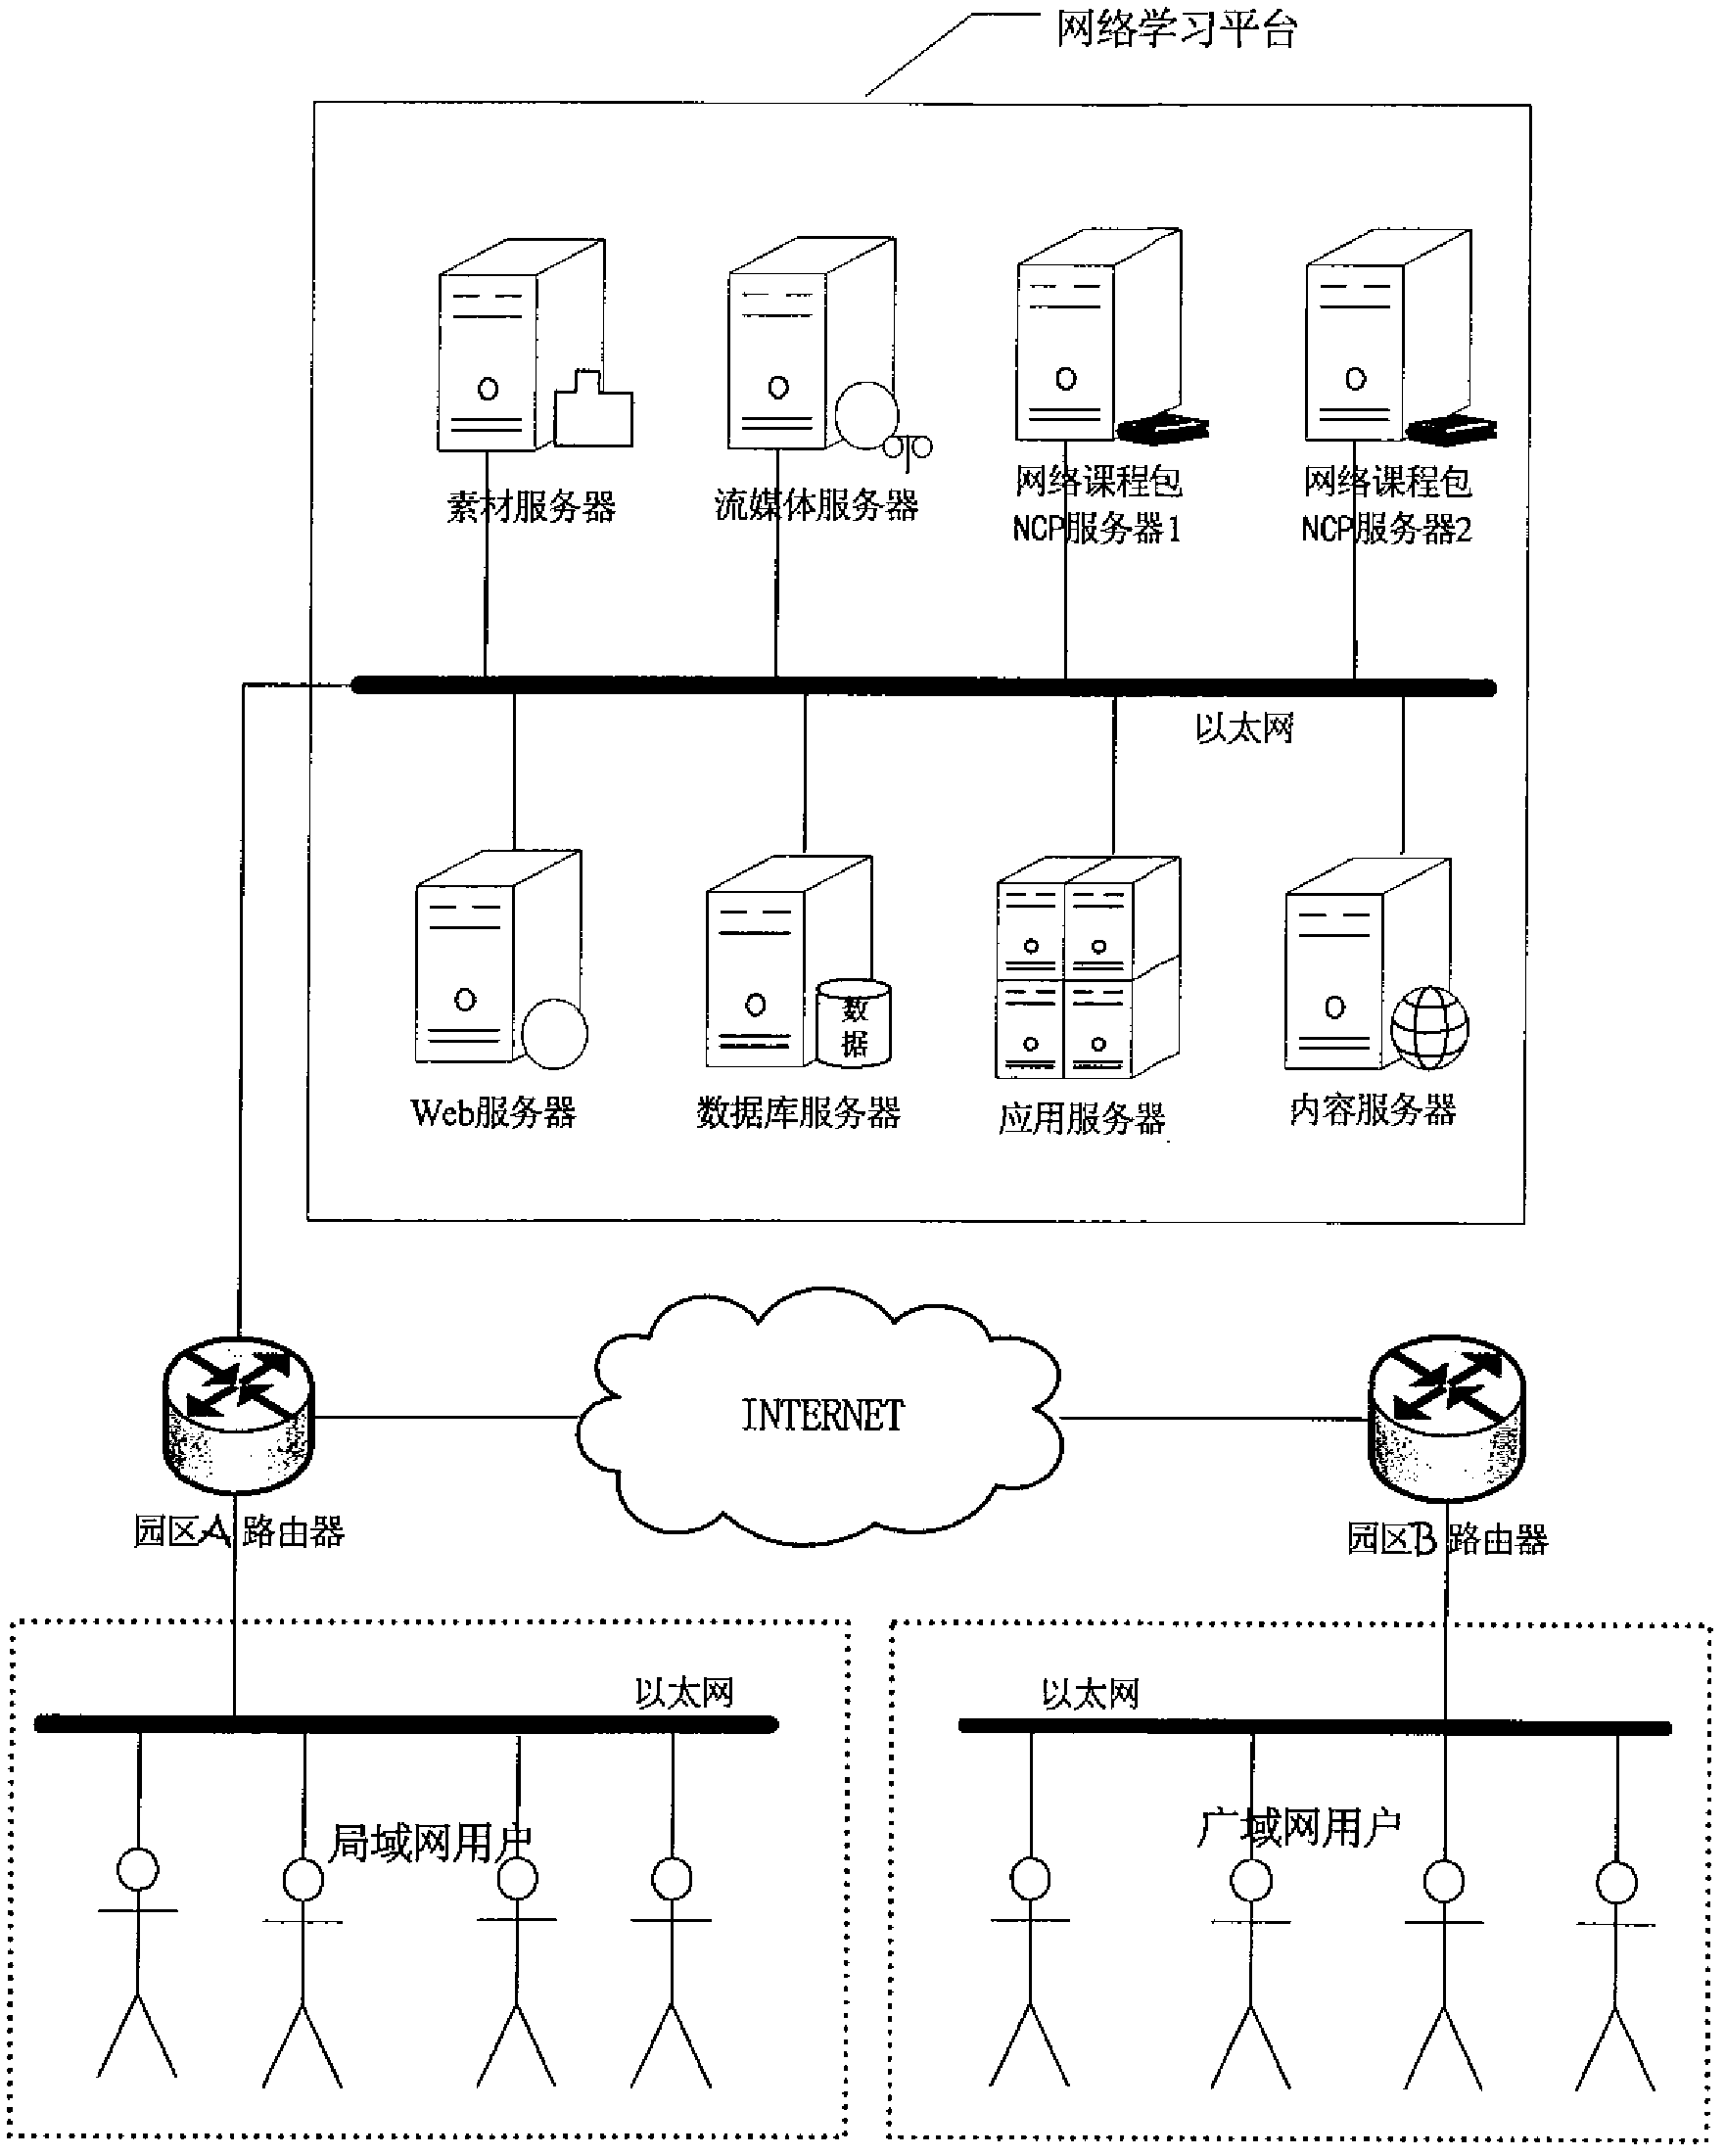 Network curriculum learning platform and communication method